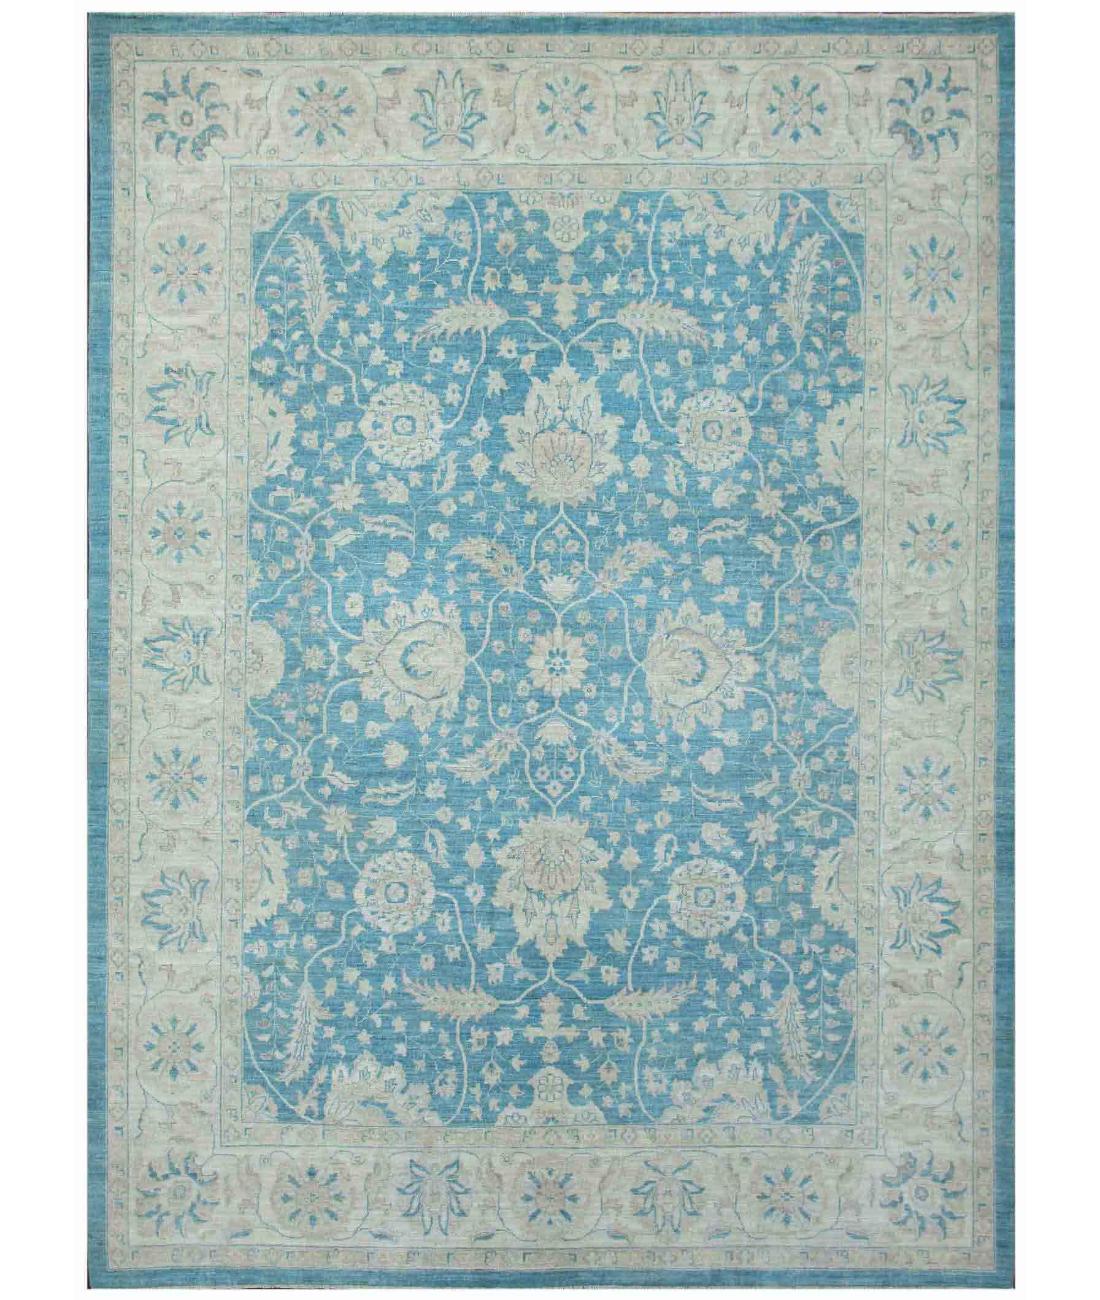 Hand Knotted Serenity Wool Rug - 7'9'' x 10'6'' 7' 9" X 10' 6" ( 236 X 320 ) / Teal / Ivory